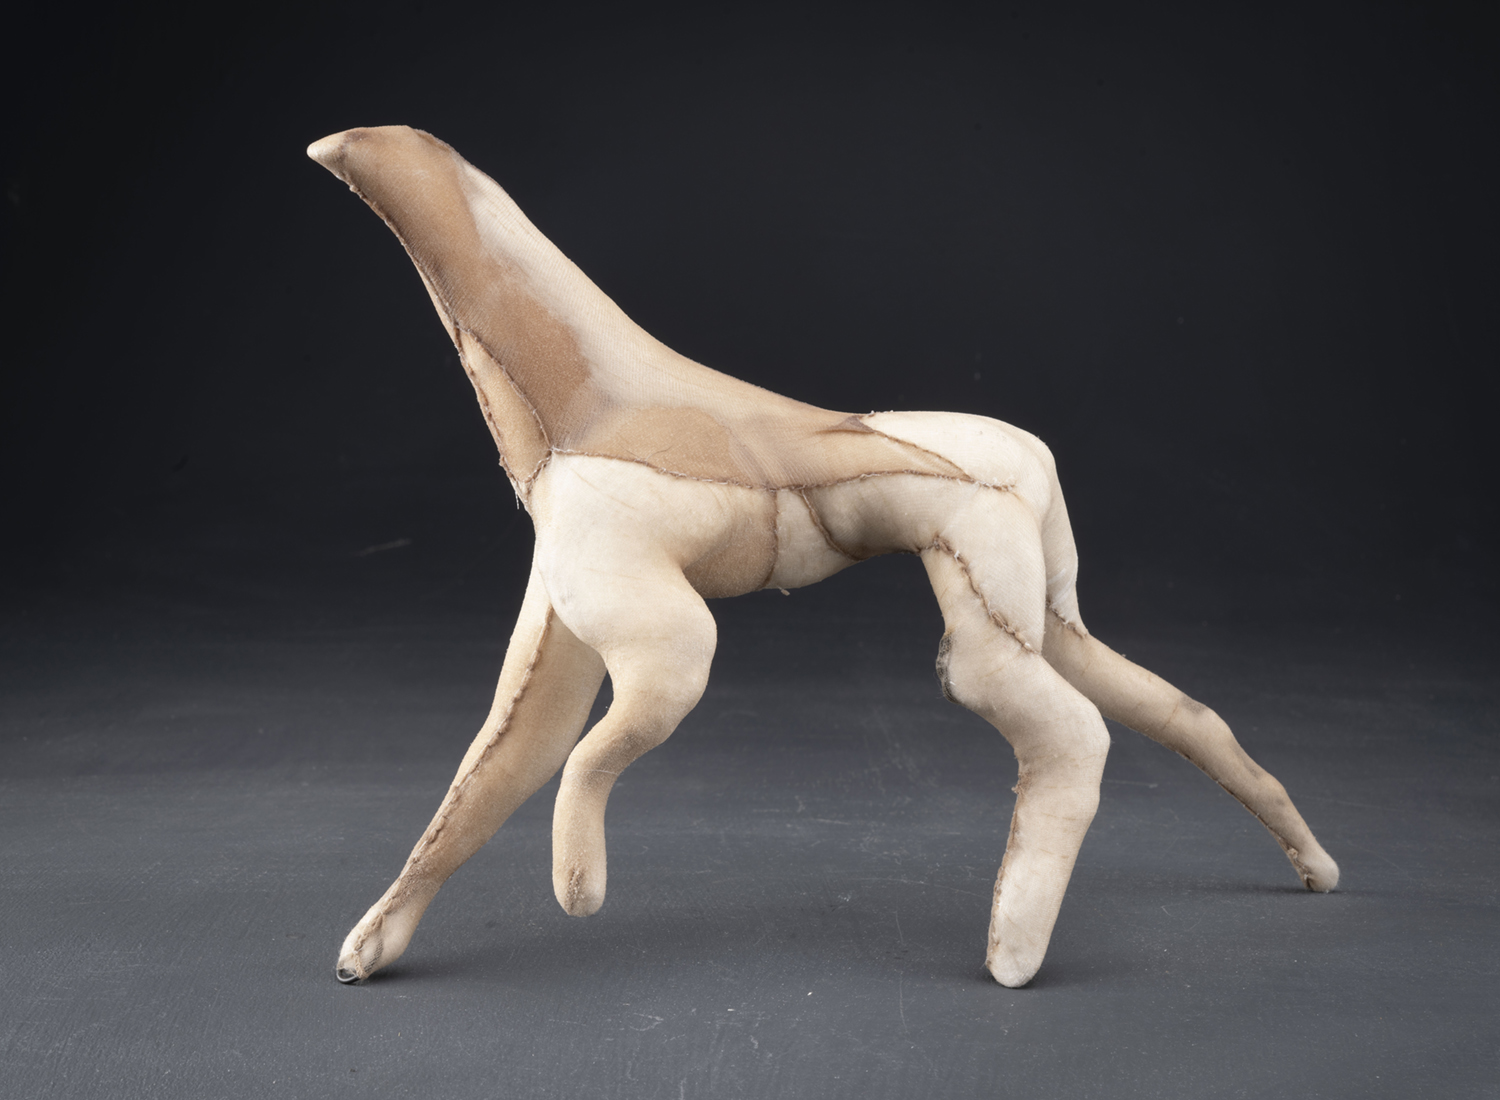 Sculpture of a lunging animal, courtesy of the artist